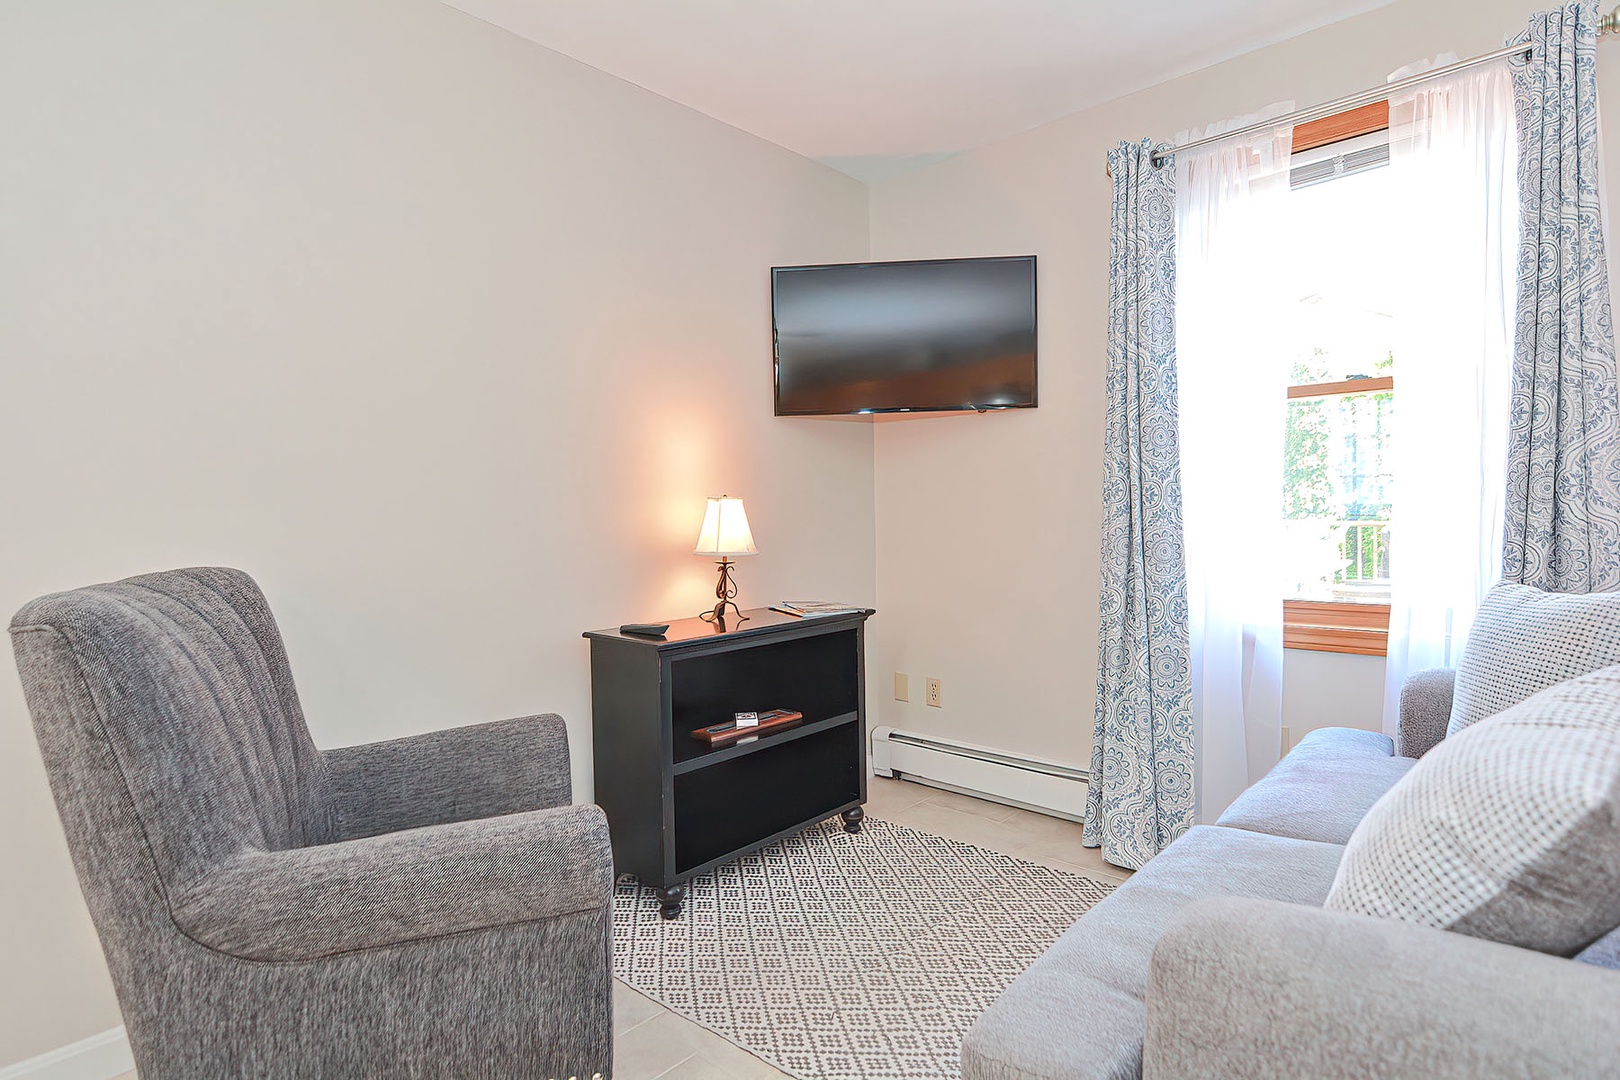 Wall-mounted tv for catching up on movies or shows.